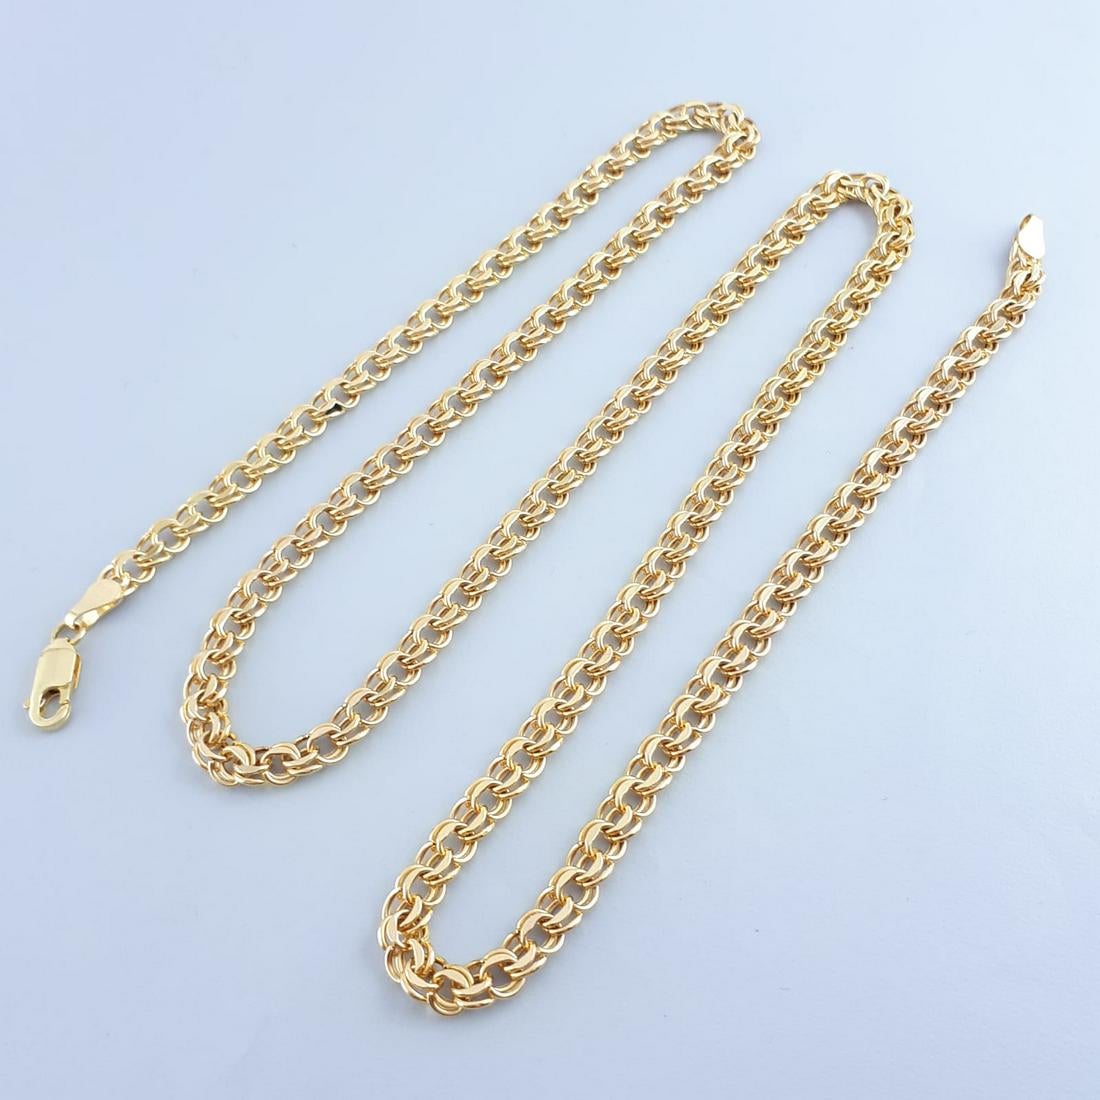 14K Yellow Gold - Necklace - Image 5 of 5